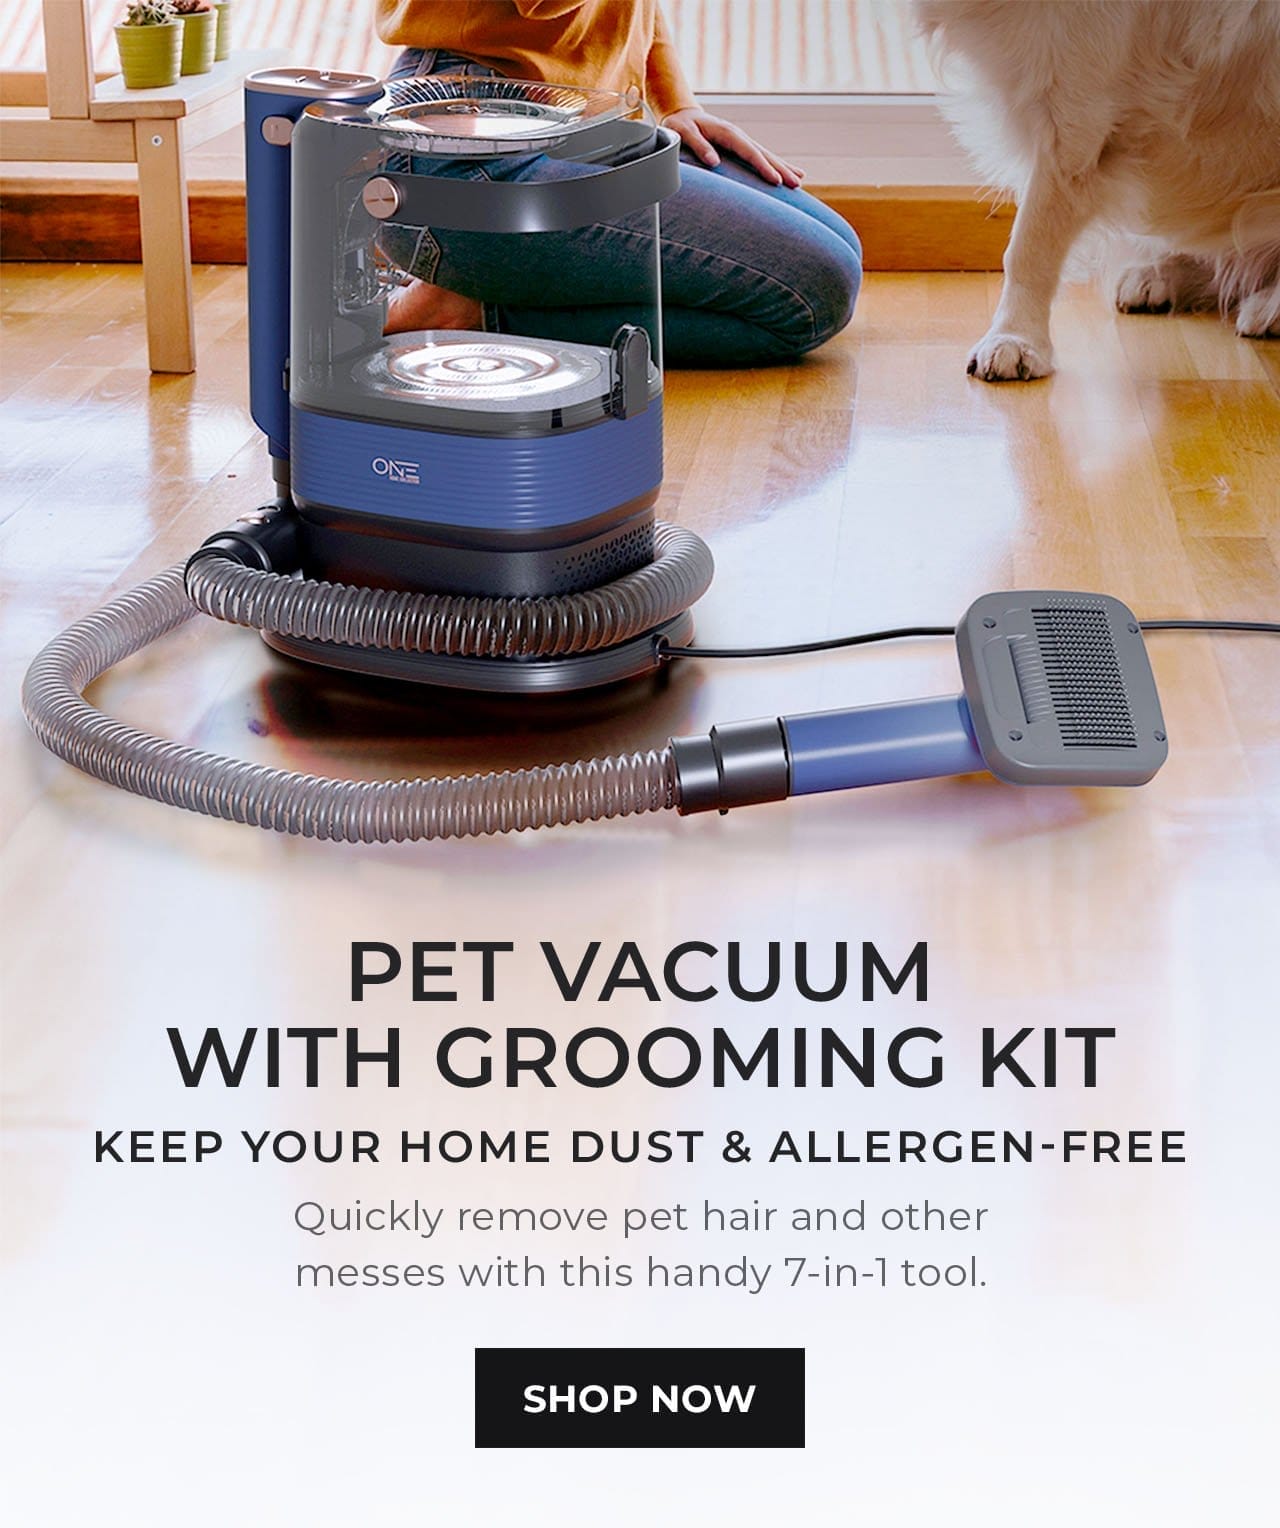 Pet Vacuum with Grooming Kit | SHOP NOW